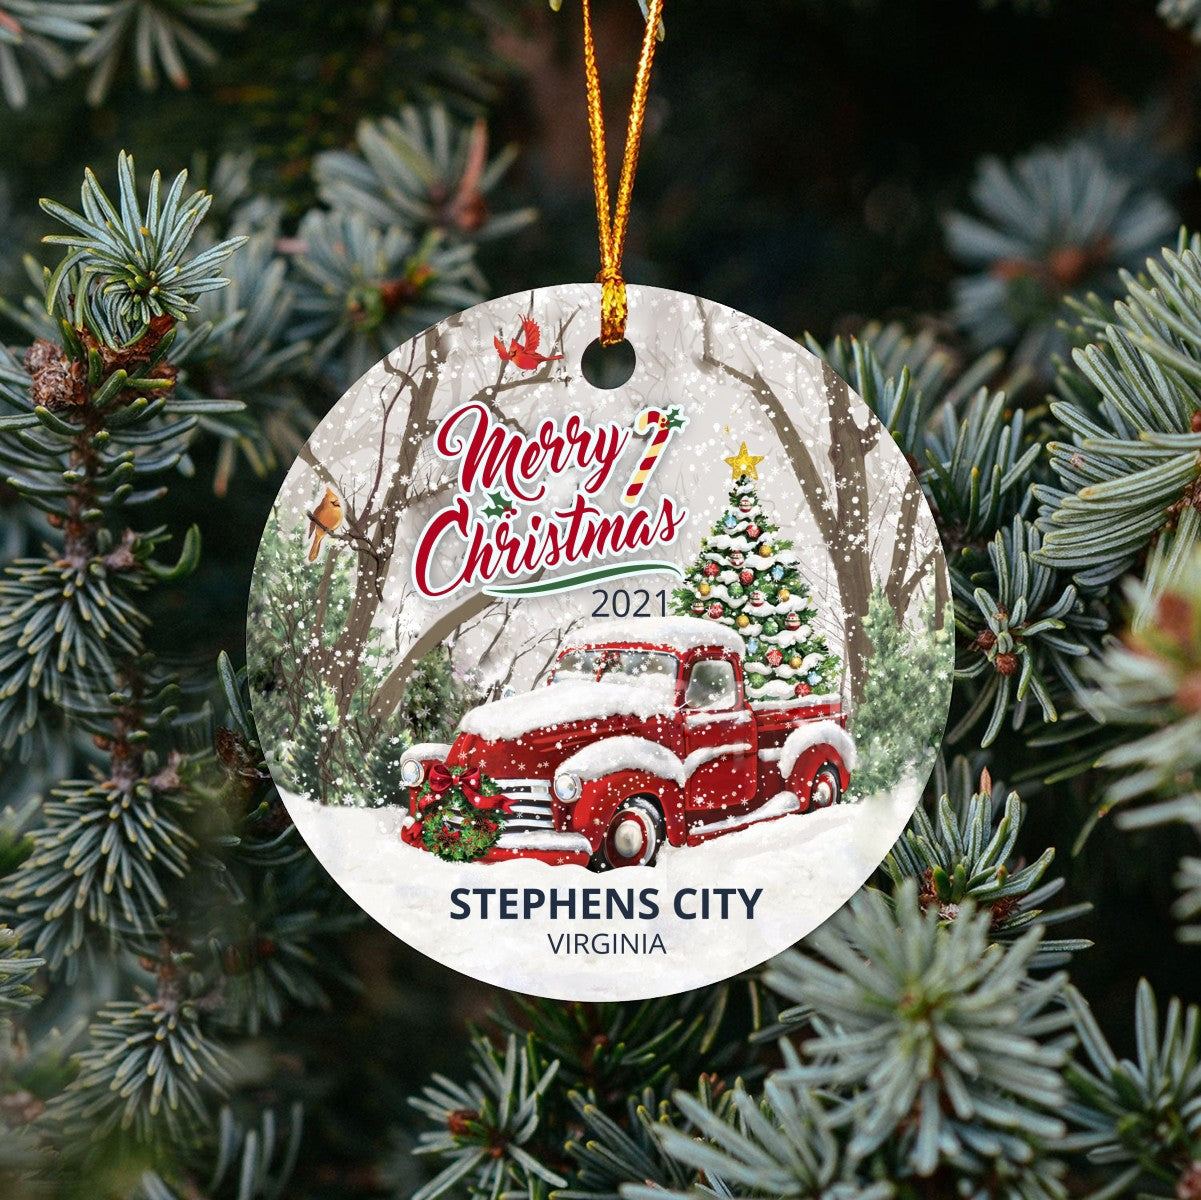 Christmas Tree Ornaments Stephens City - Ornament With Name City, State Stephens City Virginia VA Ornament - Red Truck Xmas Ornaments 3'' Plastic Gift For Family, Friend And Housewarming